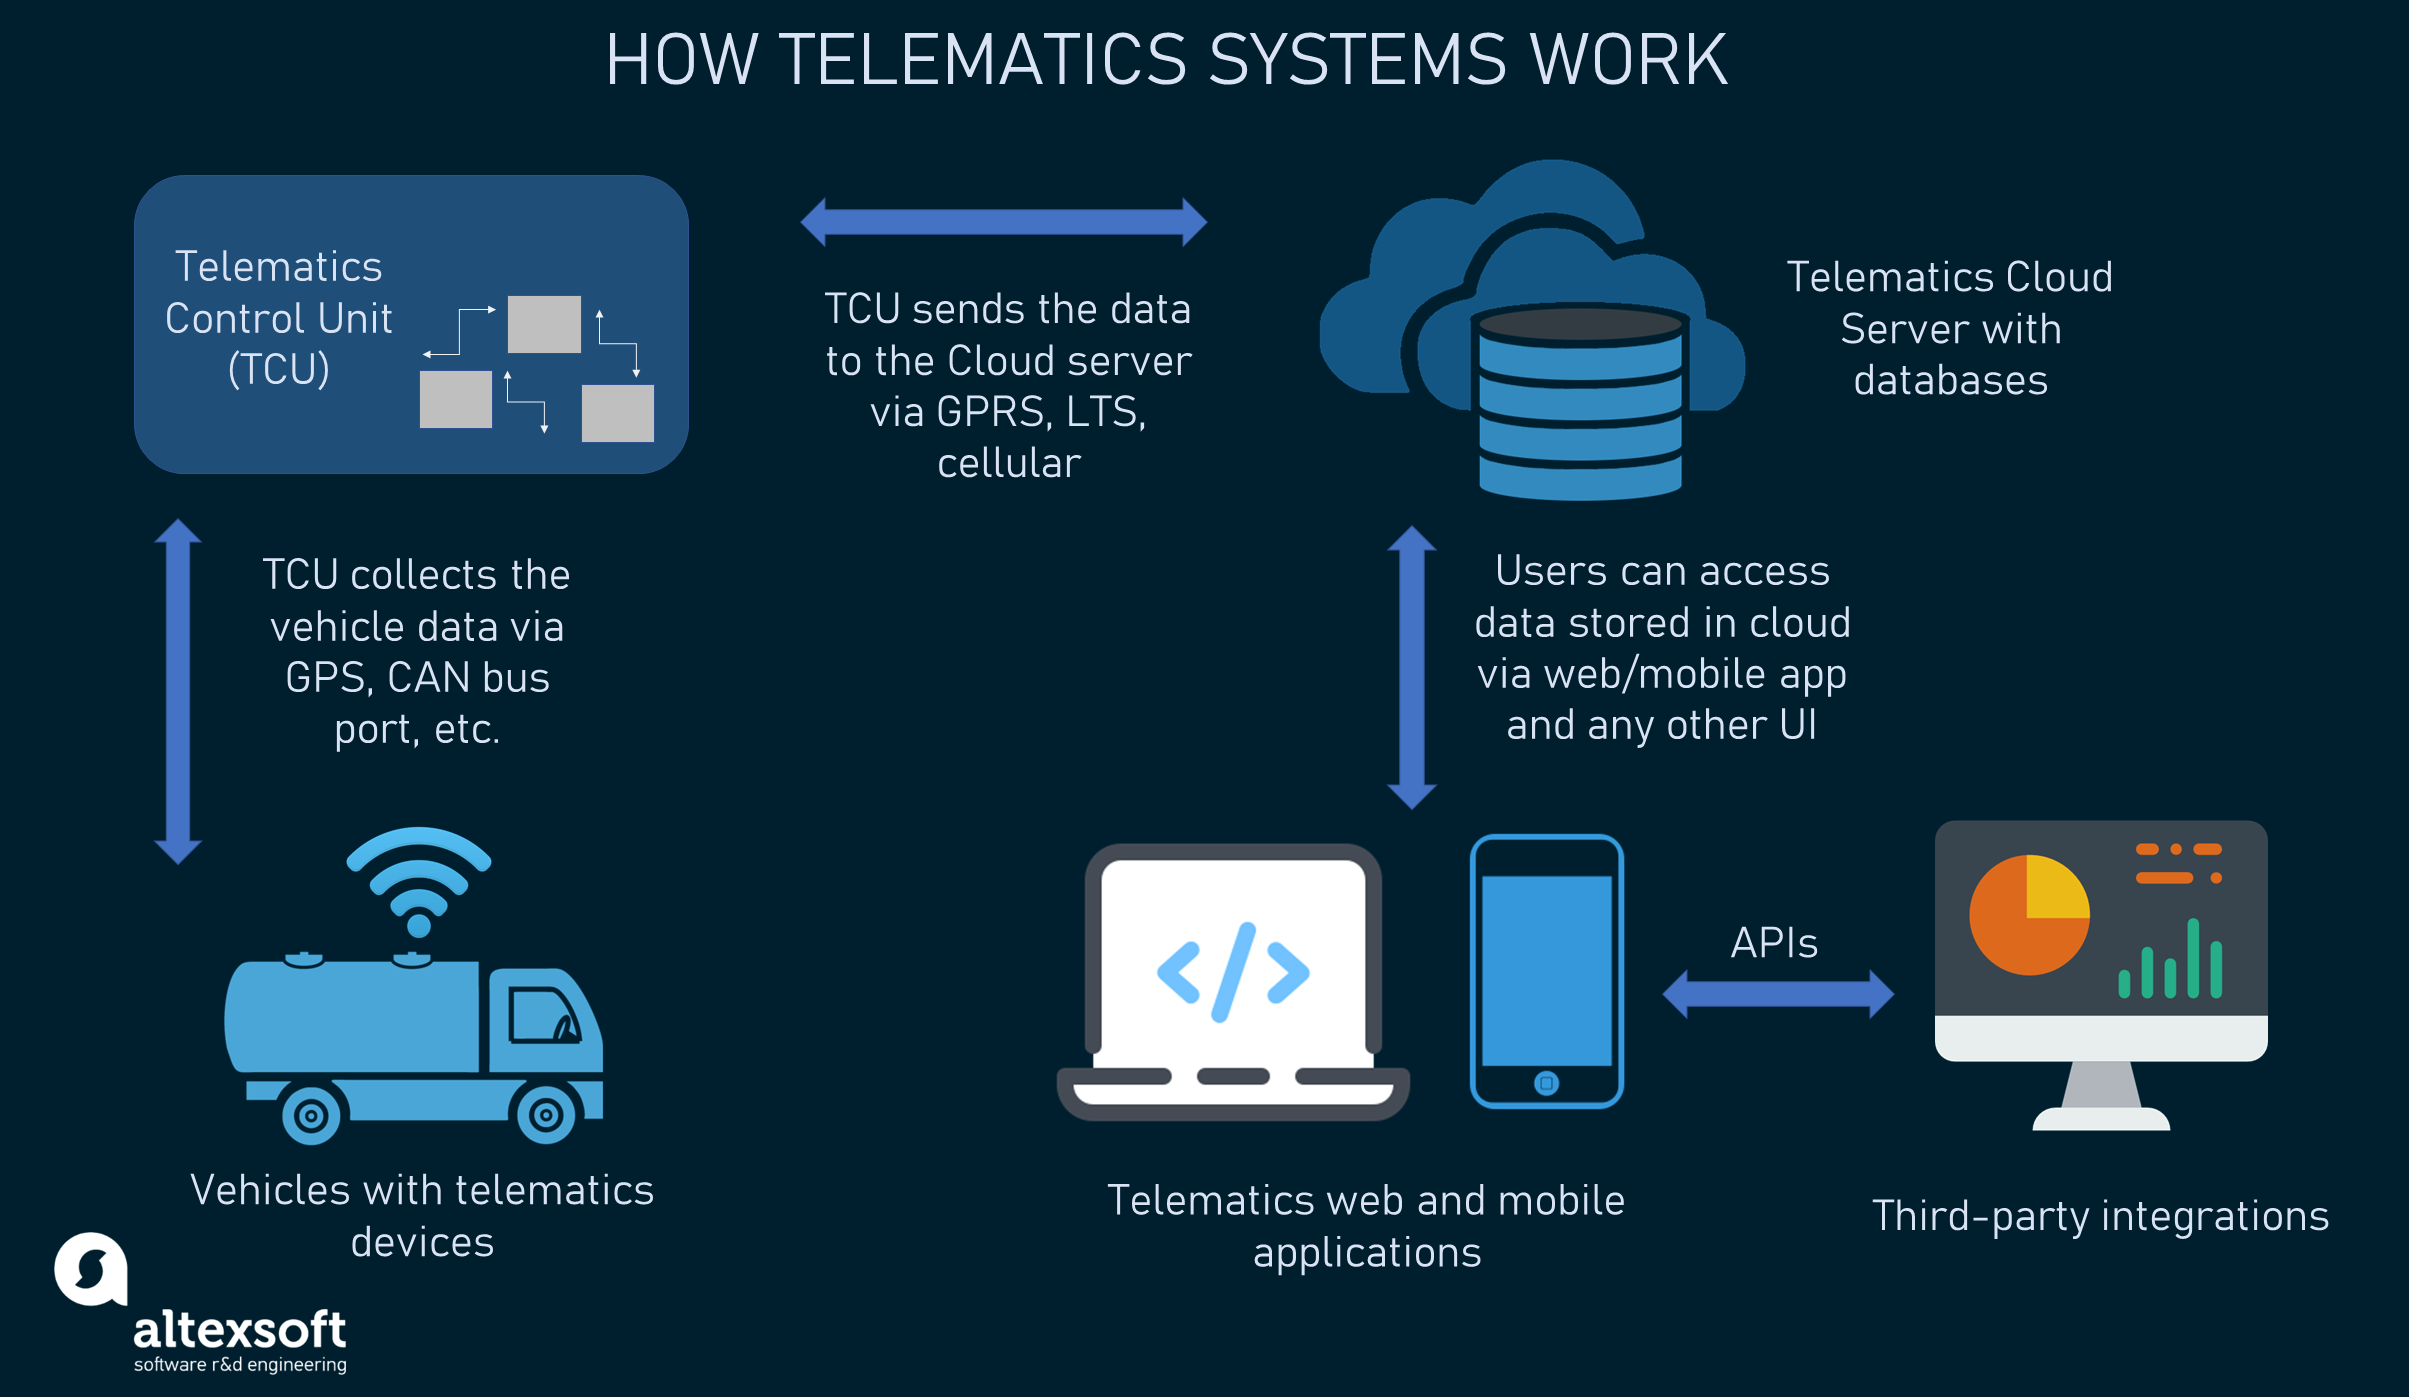 What is telematic learning?